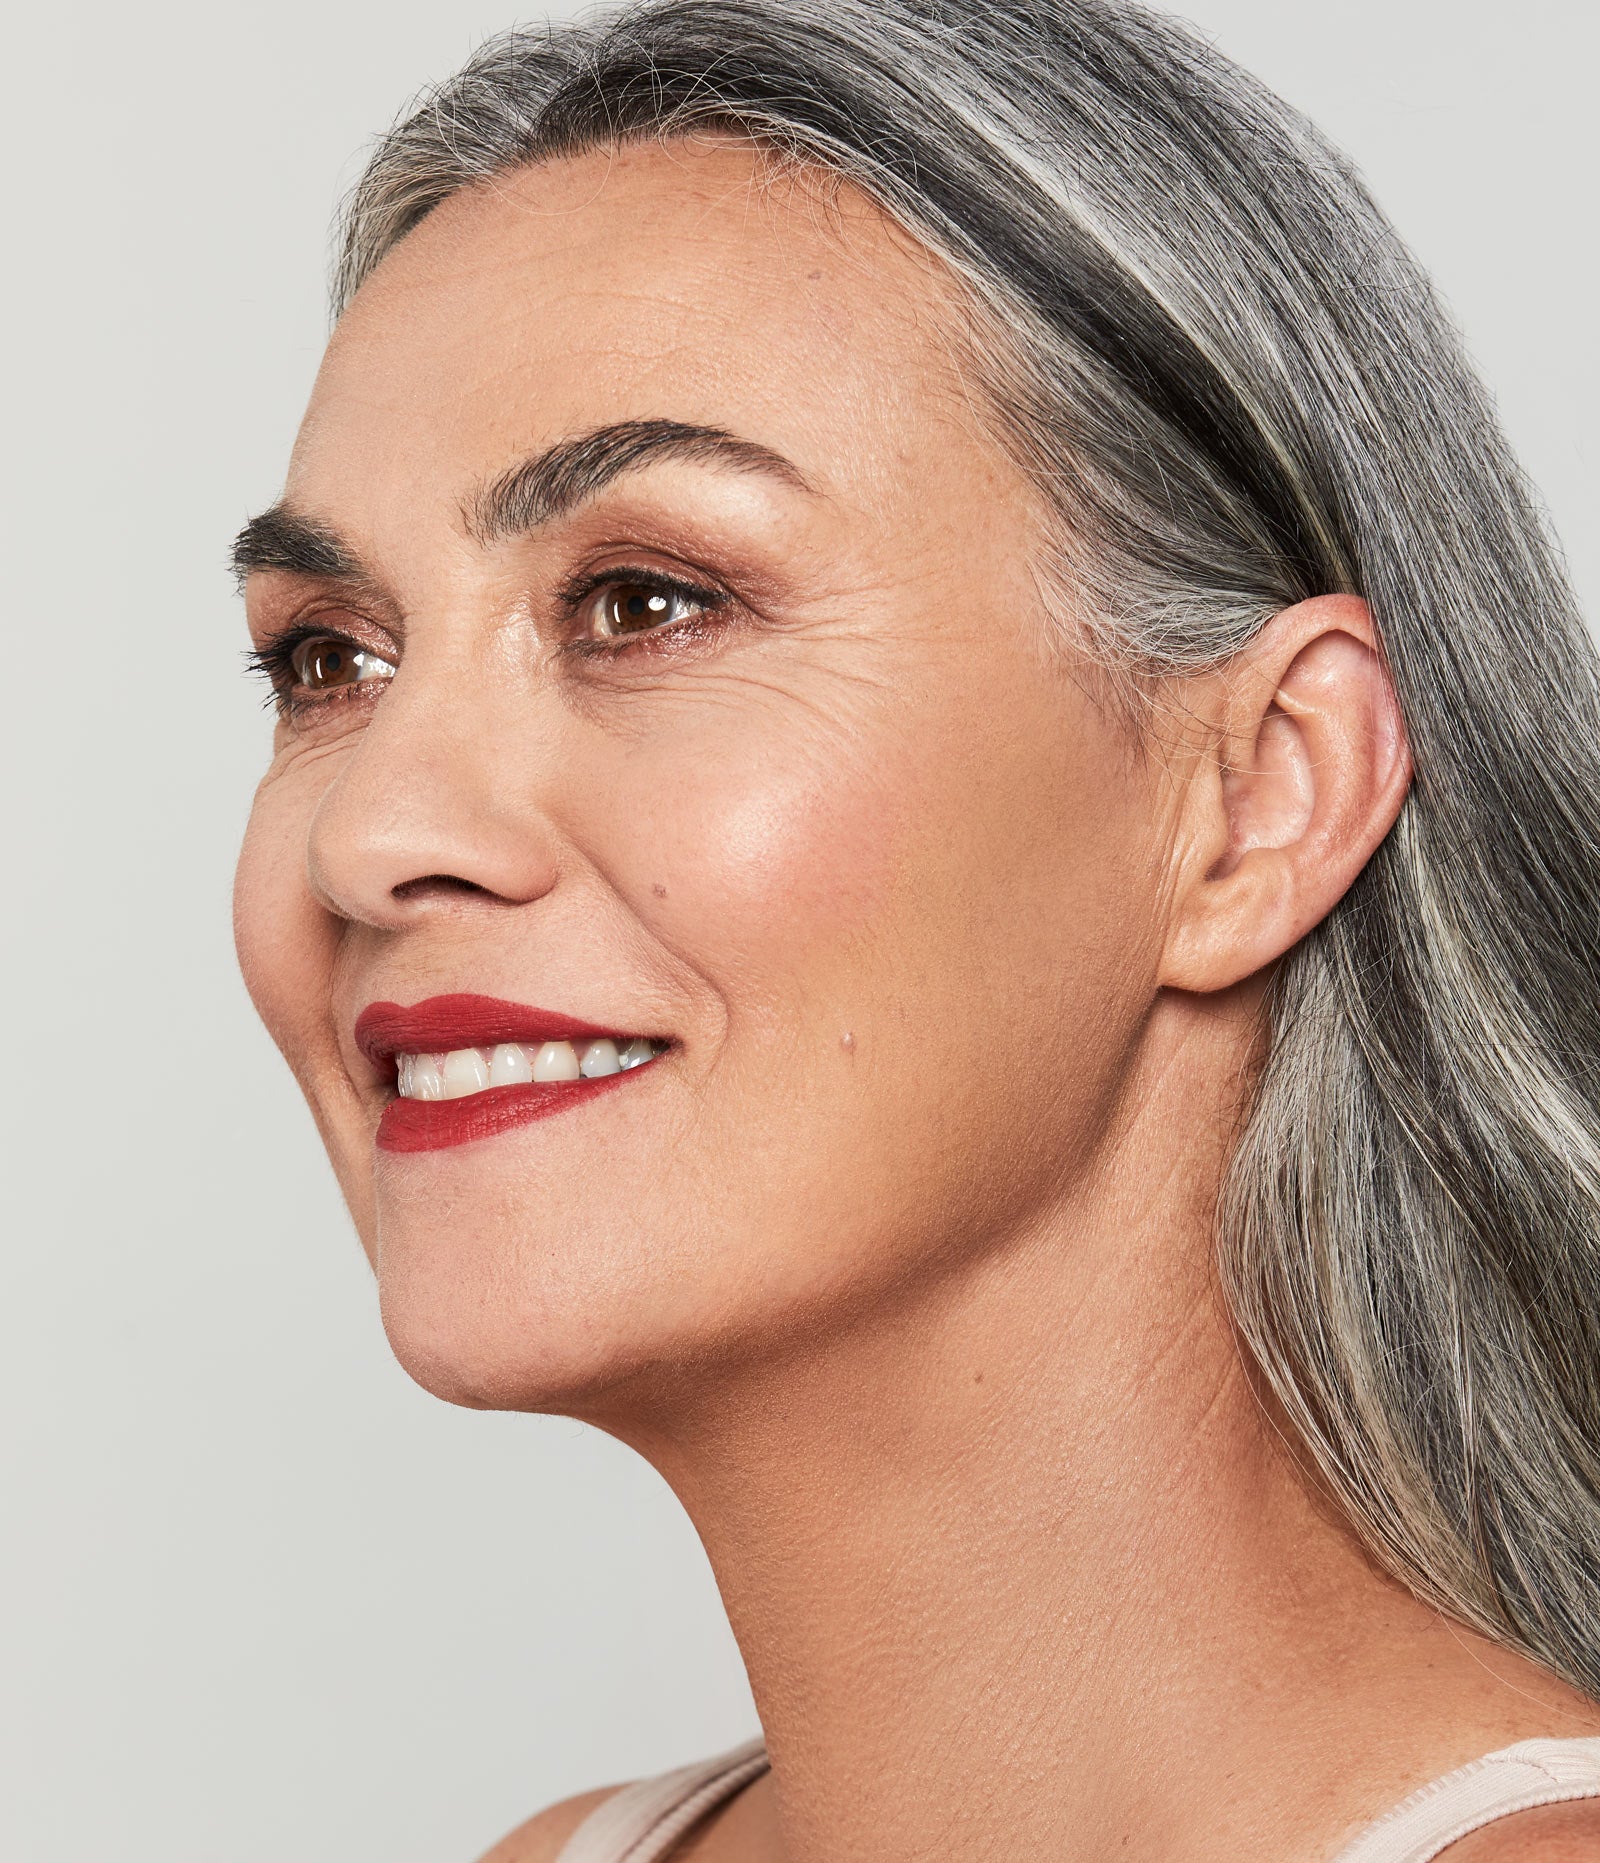 Support Your Skin Through Every Stage, at Any Age